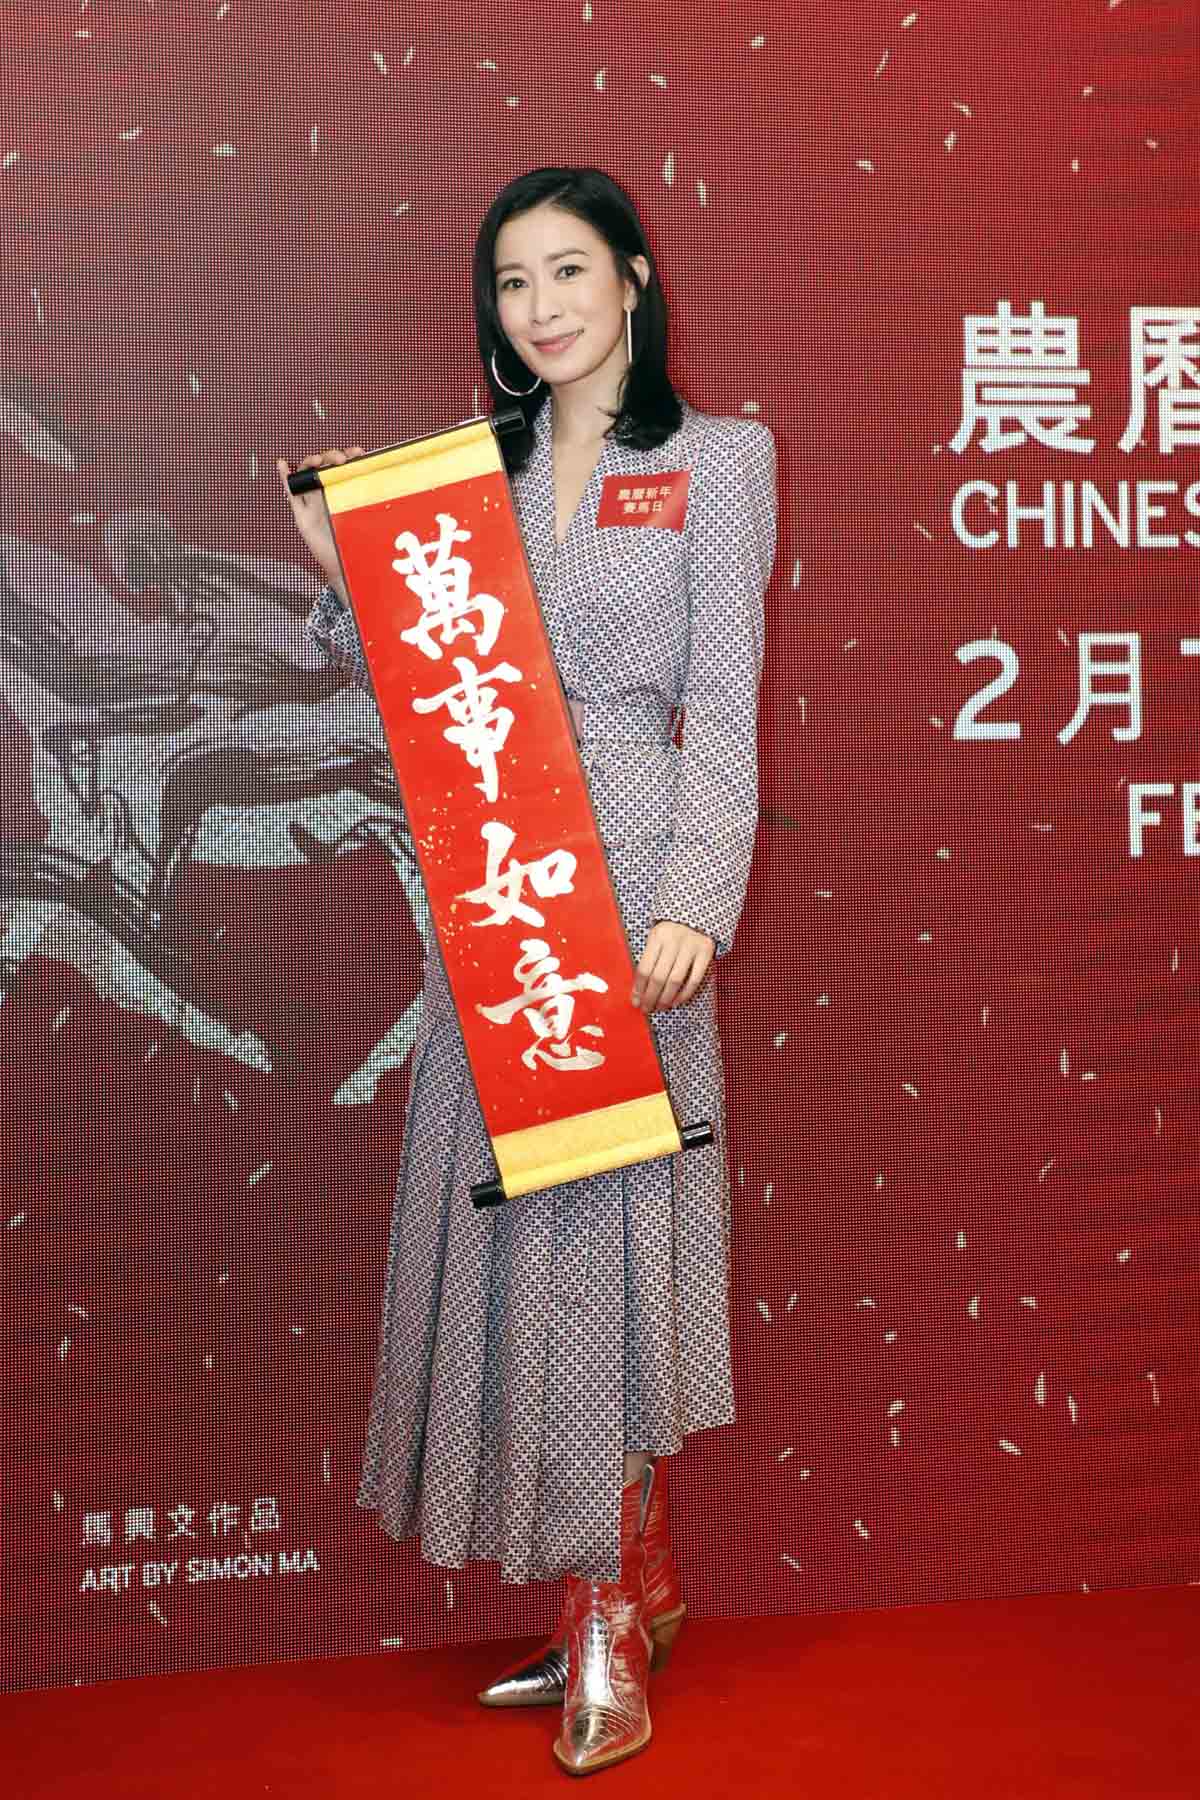 Popular actress Charmaine Sheh and Hong Kong singer Hana Kuk made an appearance at today’s press conference. They will perform at the Chinese New Year Race day opening variety show.